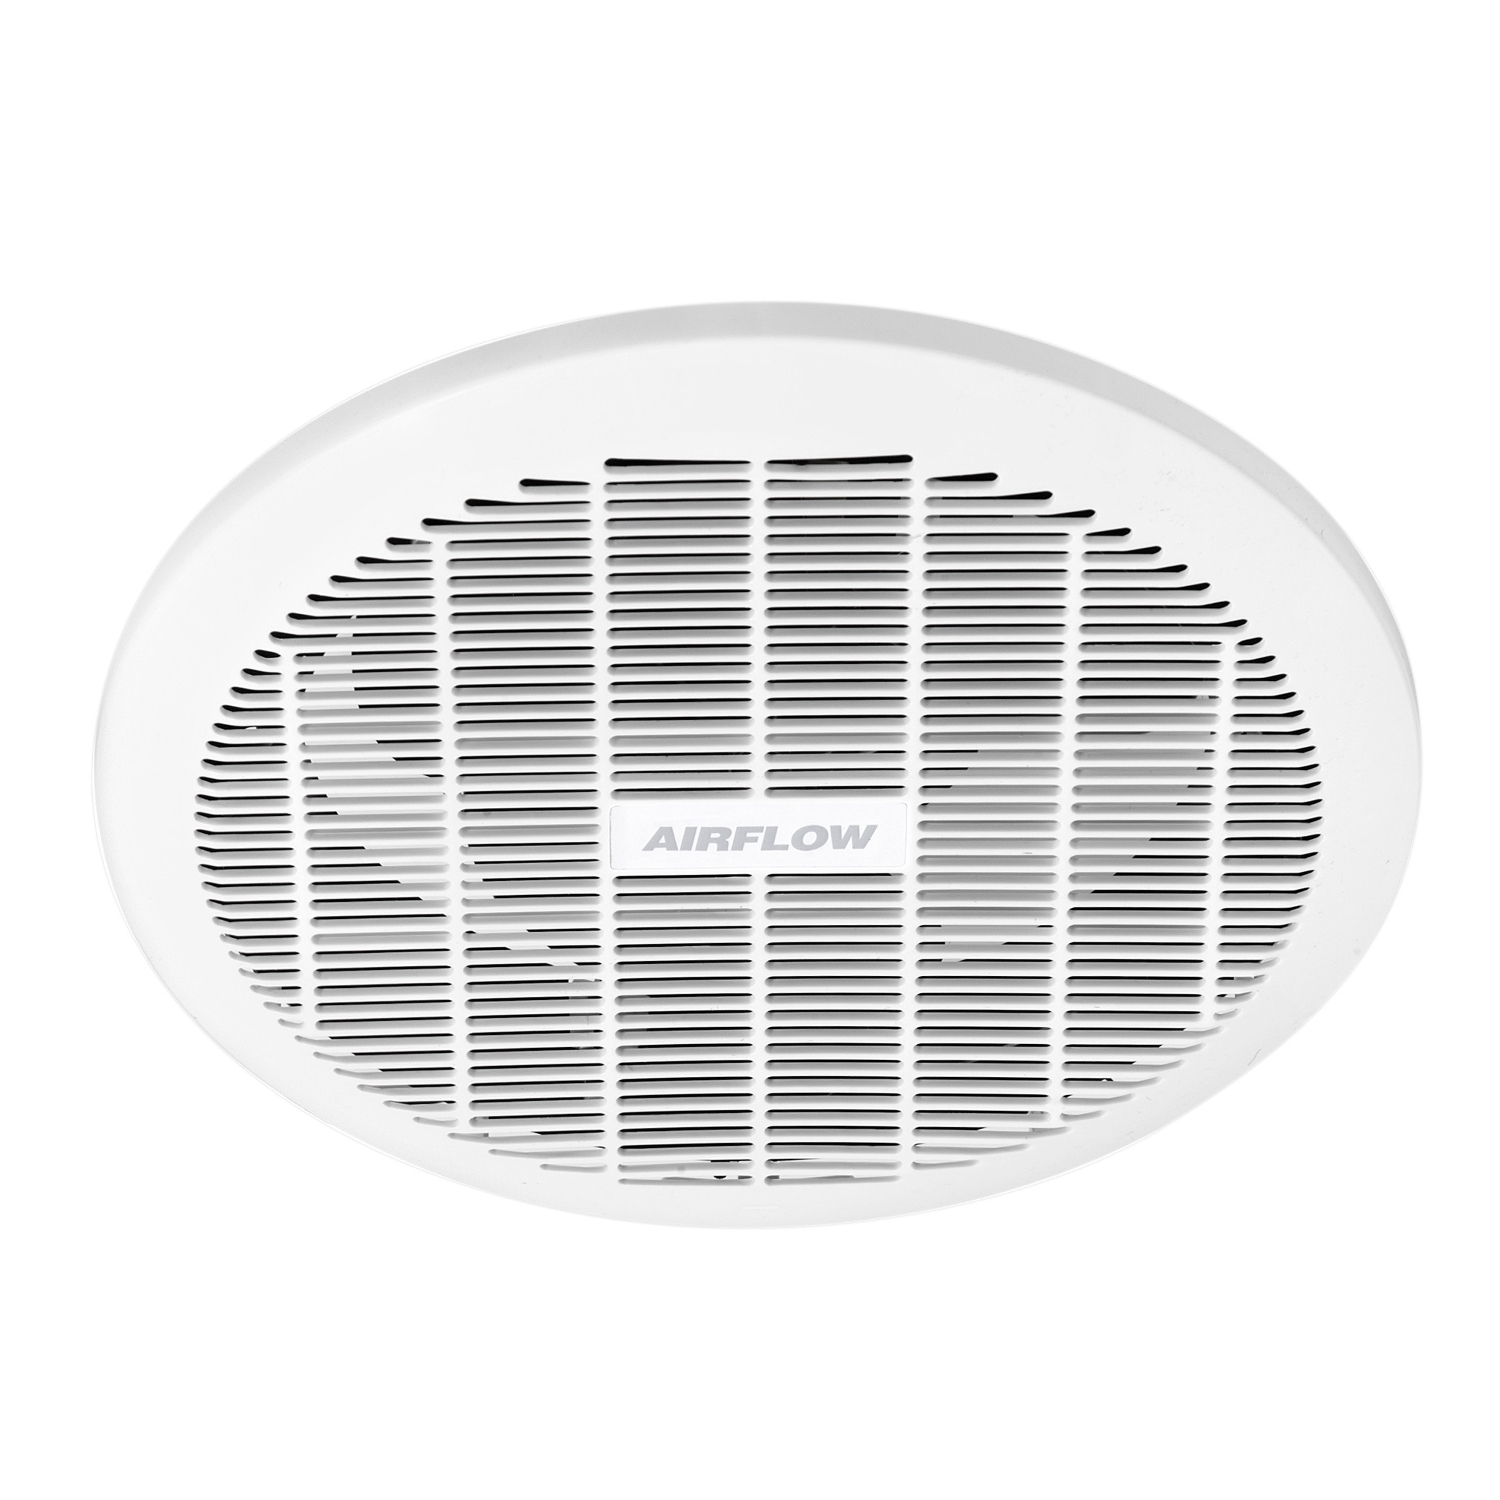 Ceiling Mounted Exhaust Fans, 200mm, 240mm diameter cut out